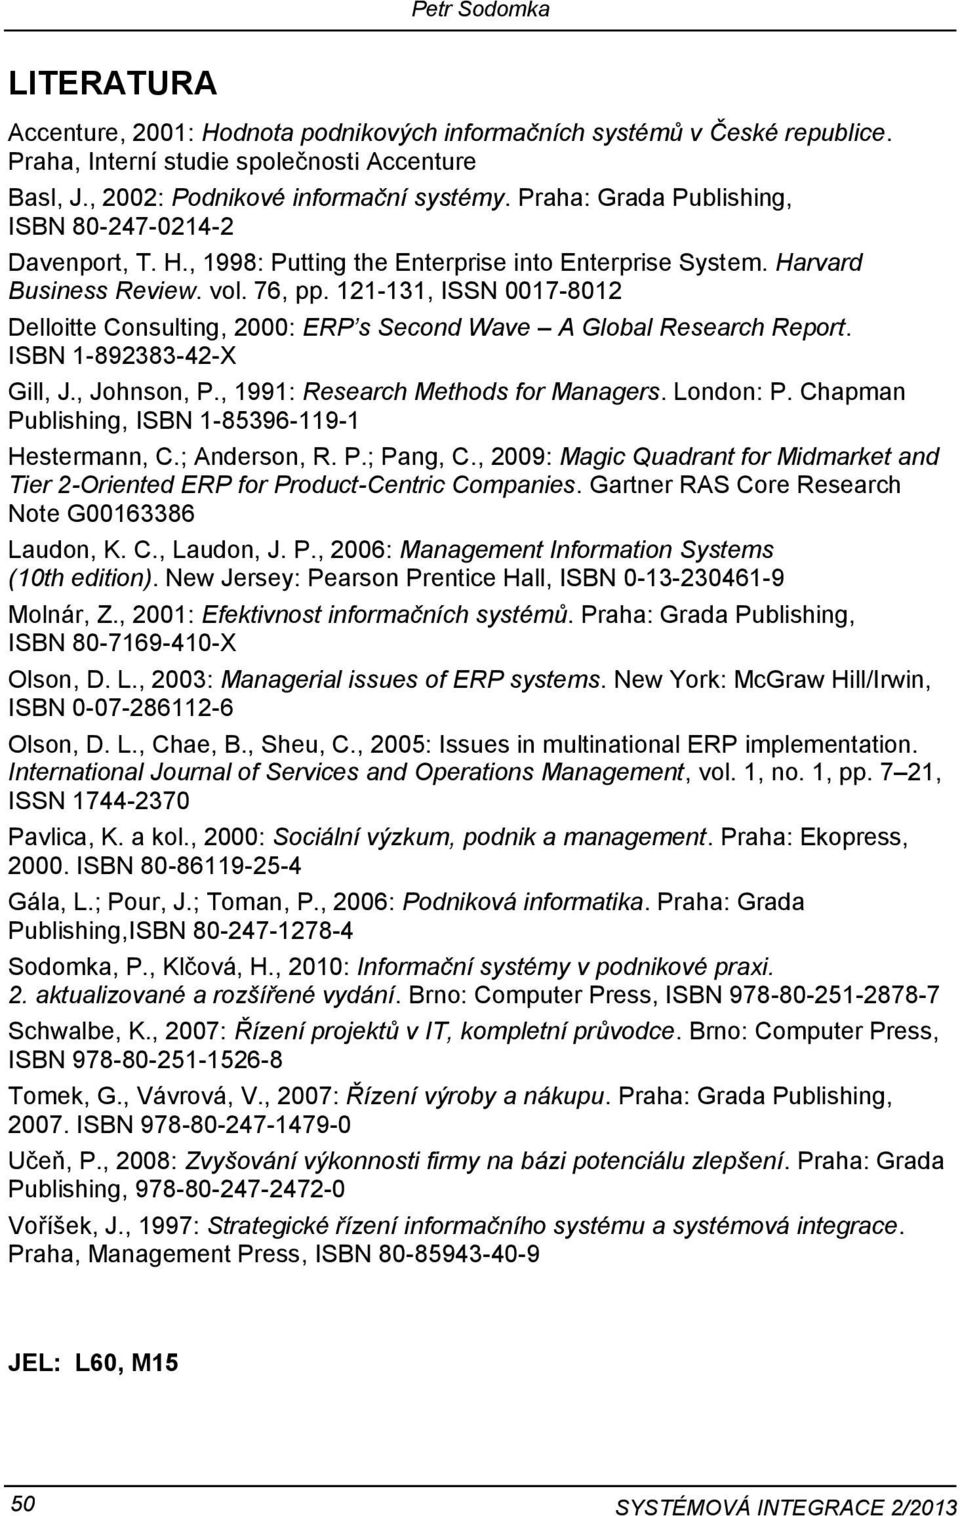 121-131, ISSN 0017-8012 Delloitte Consulting, 2000: ERP s Second Wave A Global Research Report. ISBN 1-892383-42-X Gill, J., Johnson, P., 1991: Research Methods for Managers. London: P.